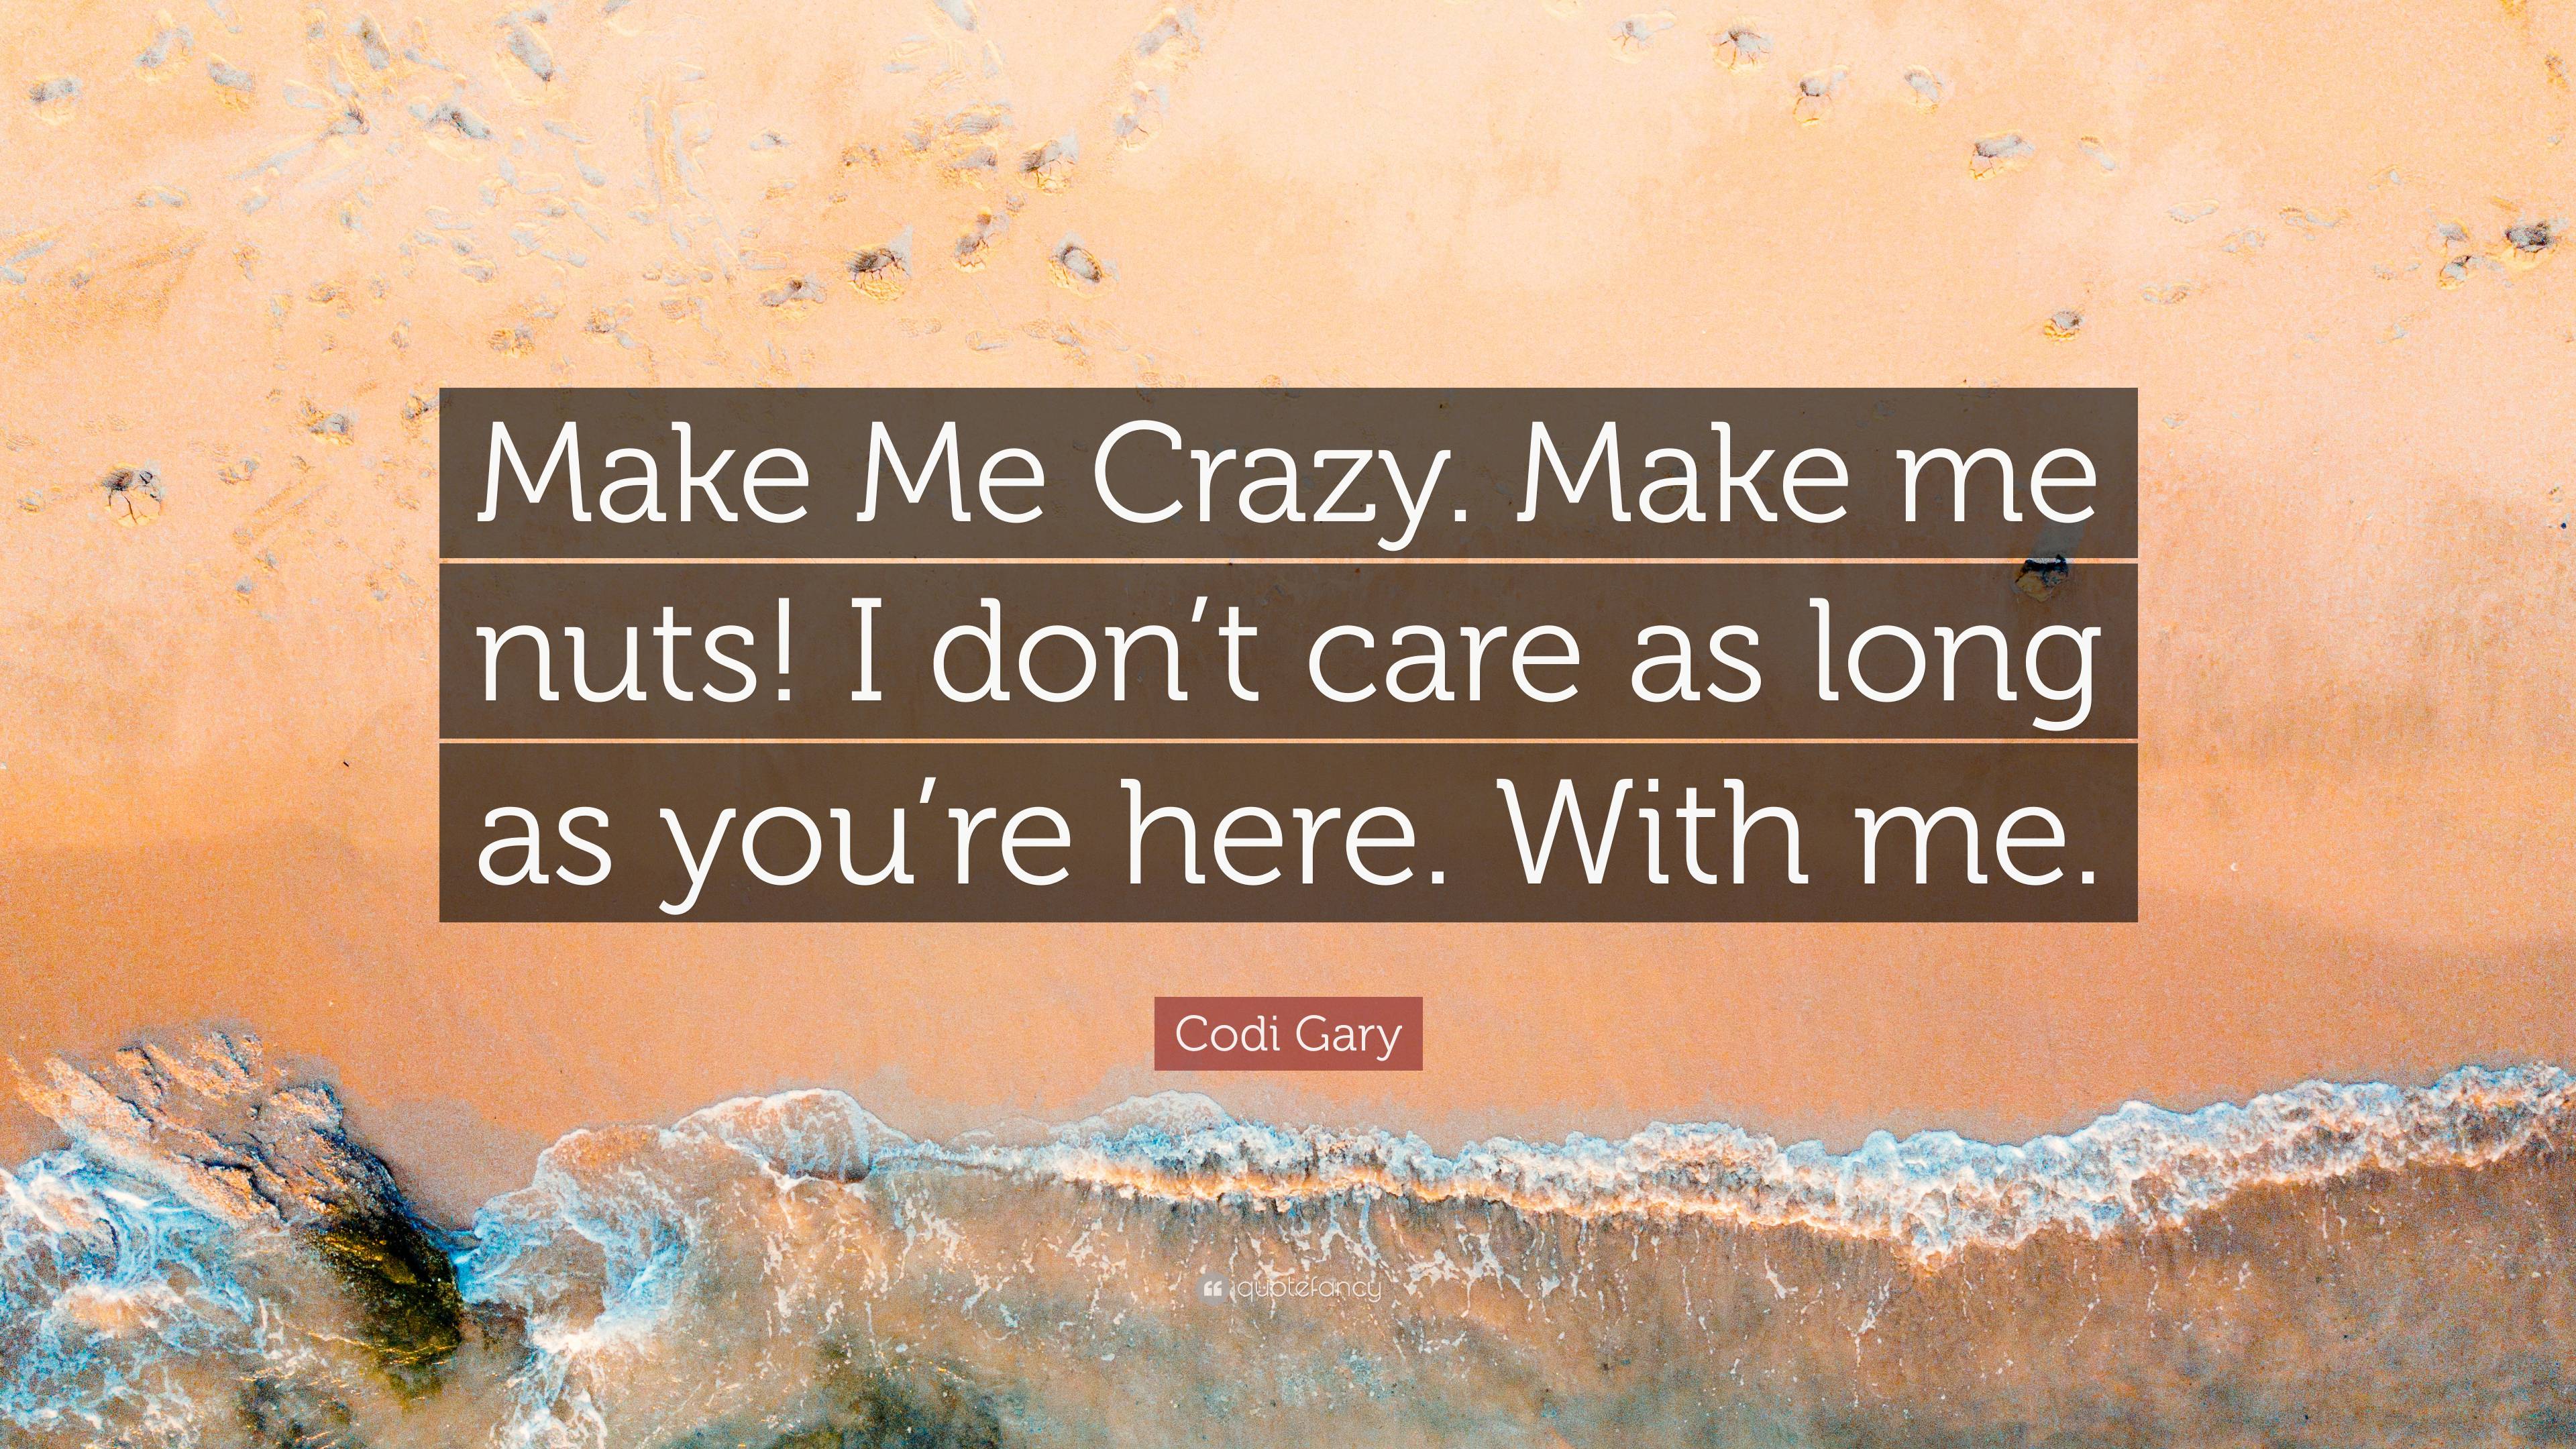 https://quotefancy.com/media/wallpaper/3840x2160/7478770-Codi-Gary-Quote-Make-Me-Crazy-Make-me-nuts-I-don-t-care-as-long-as.jpg